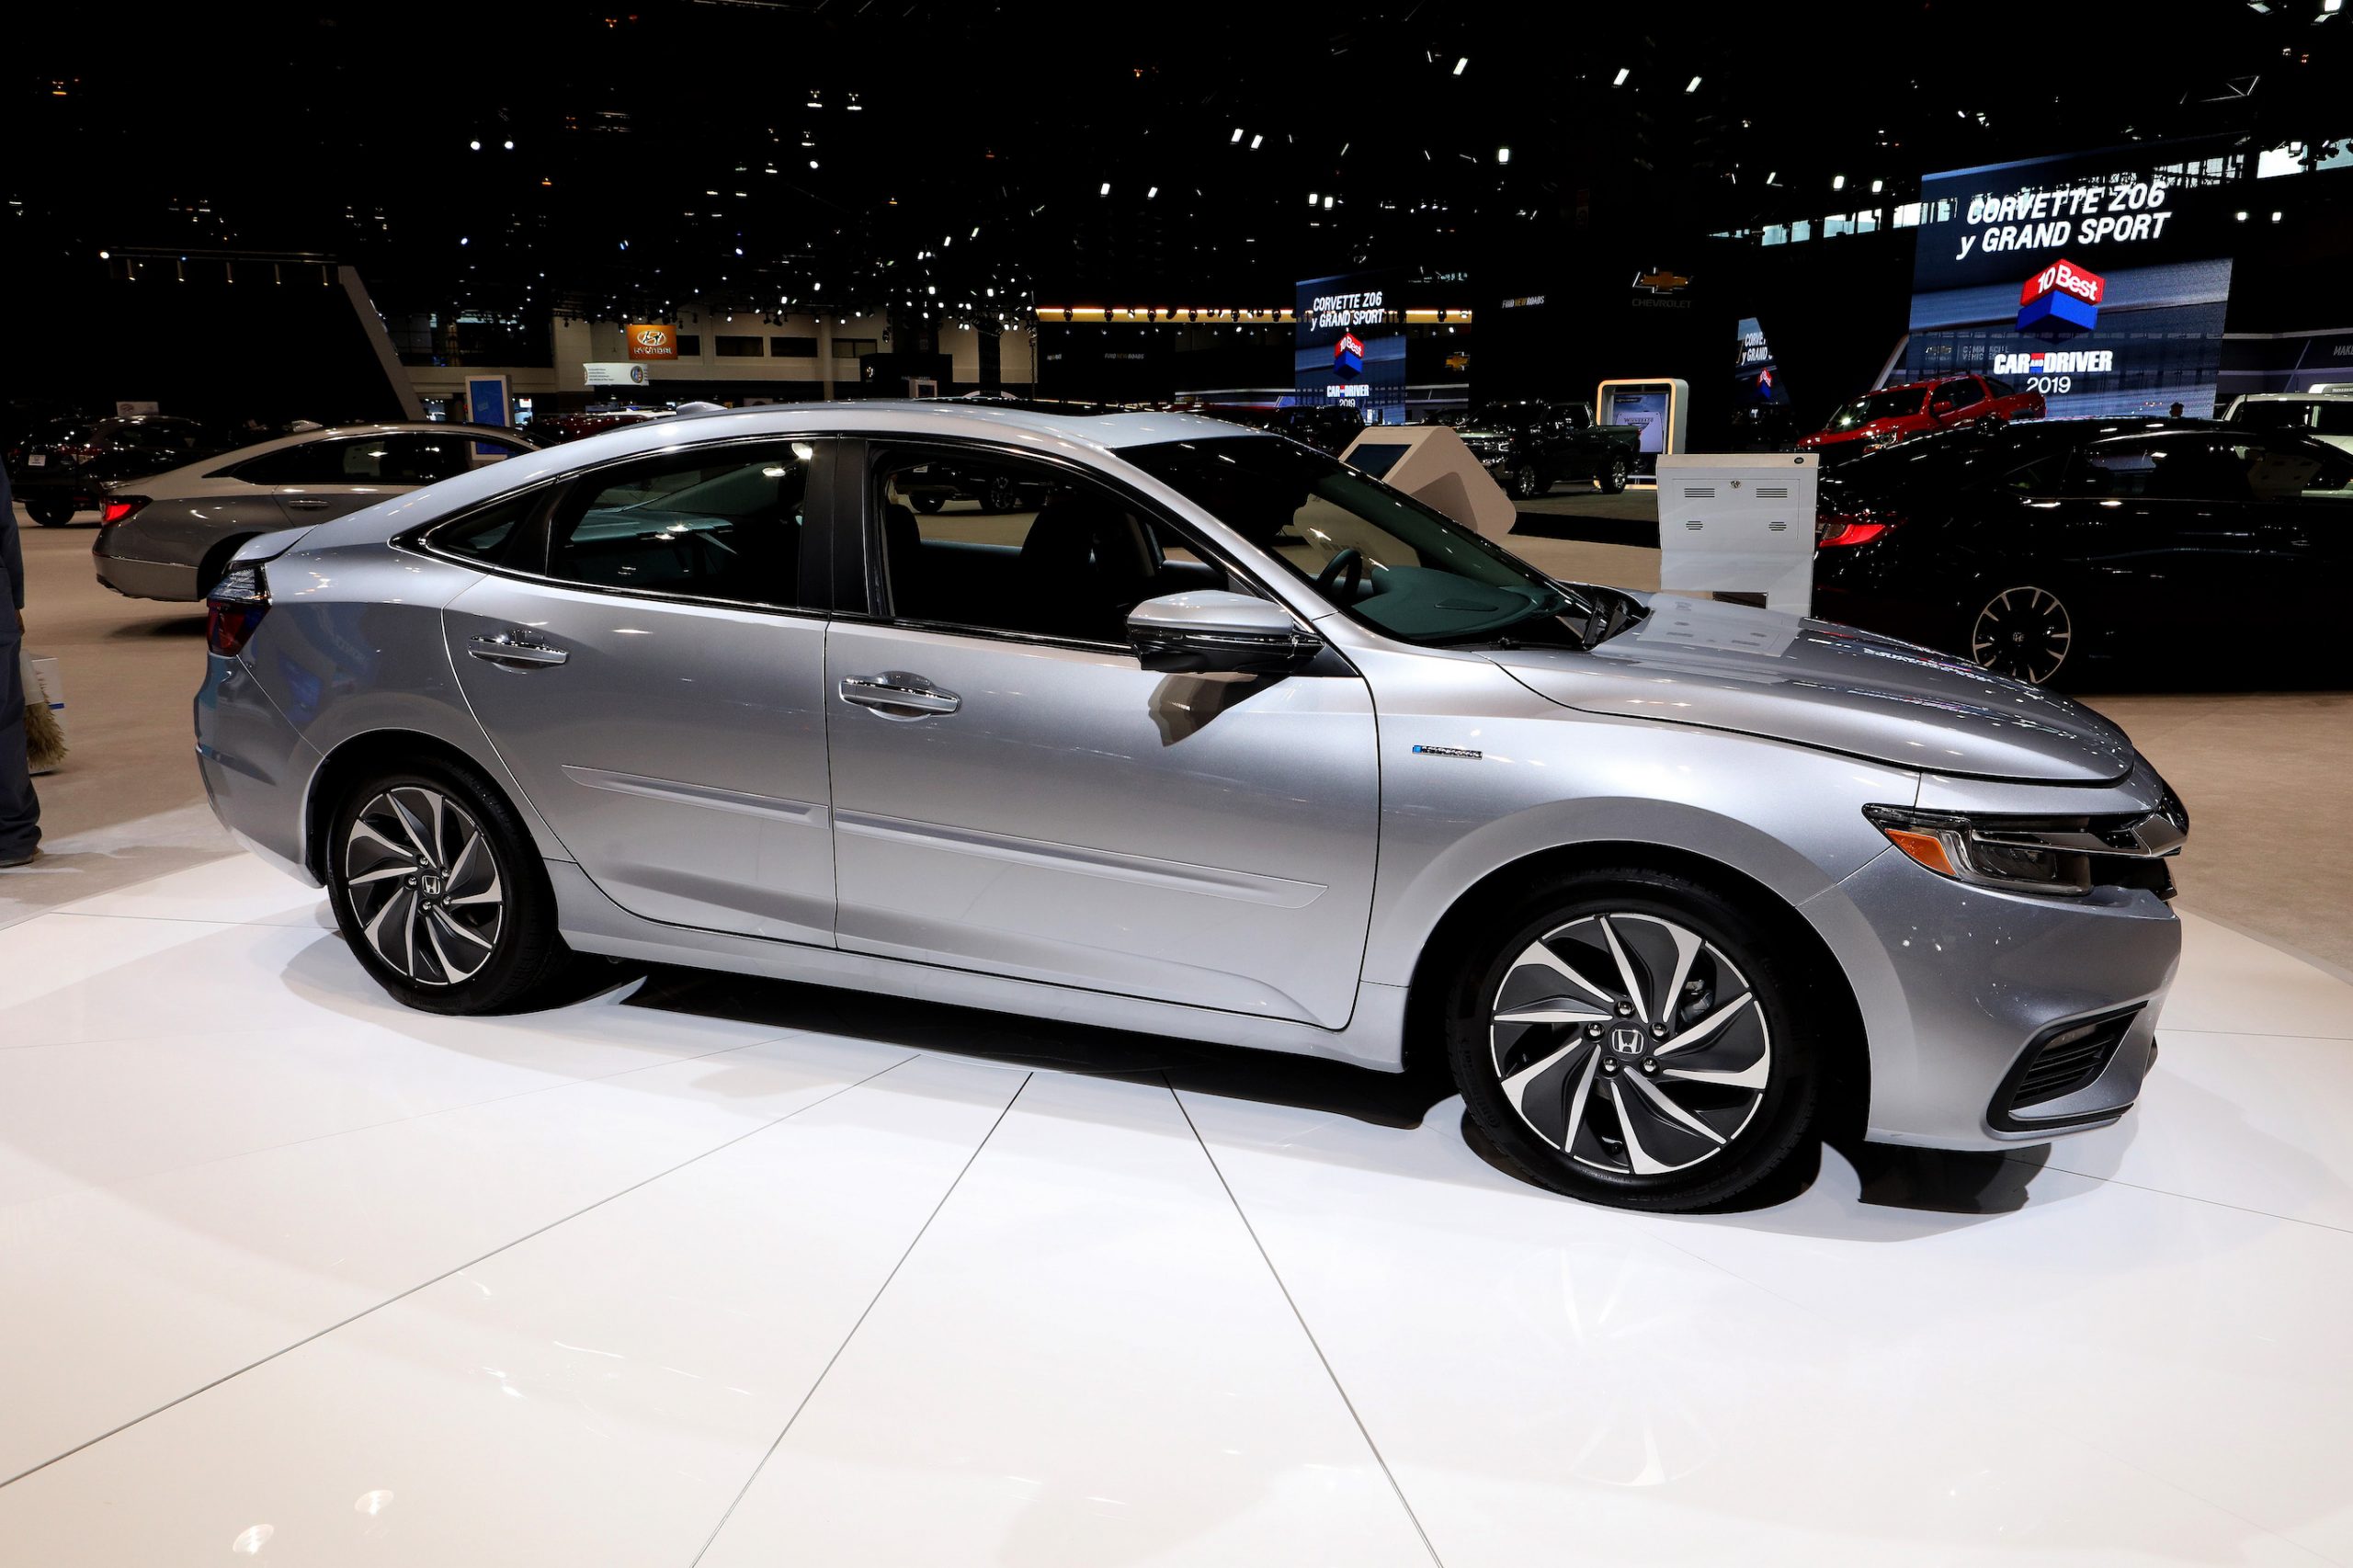 Silver 2019 Honda Insight Hybrid is on display at the 111th Annual Chicago Auto Show